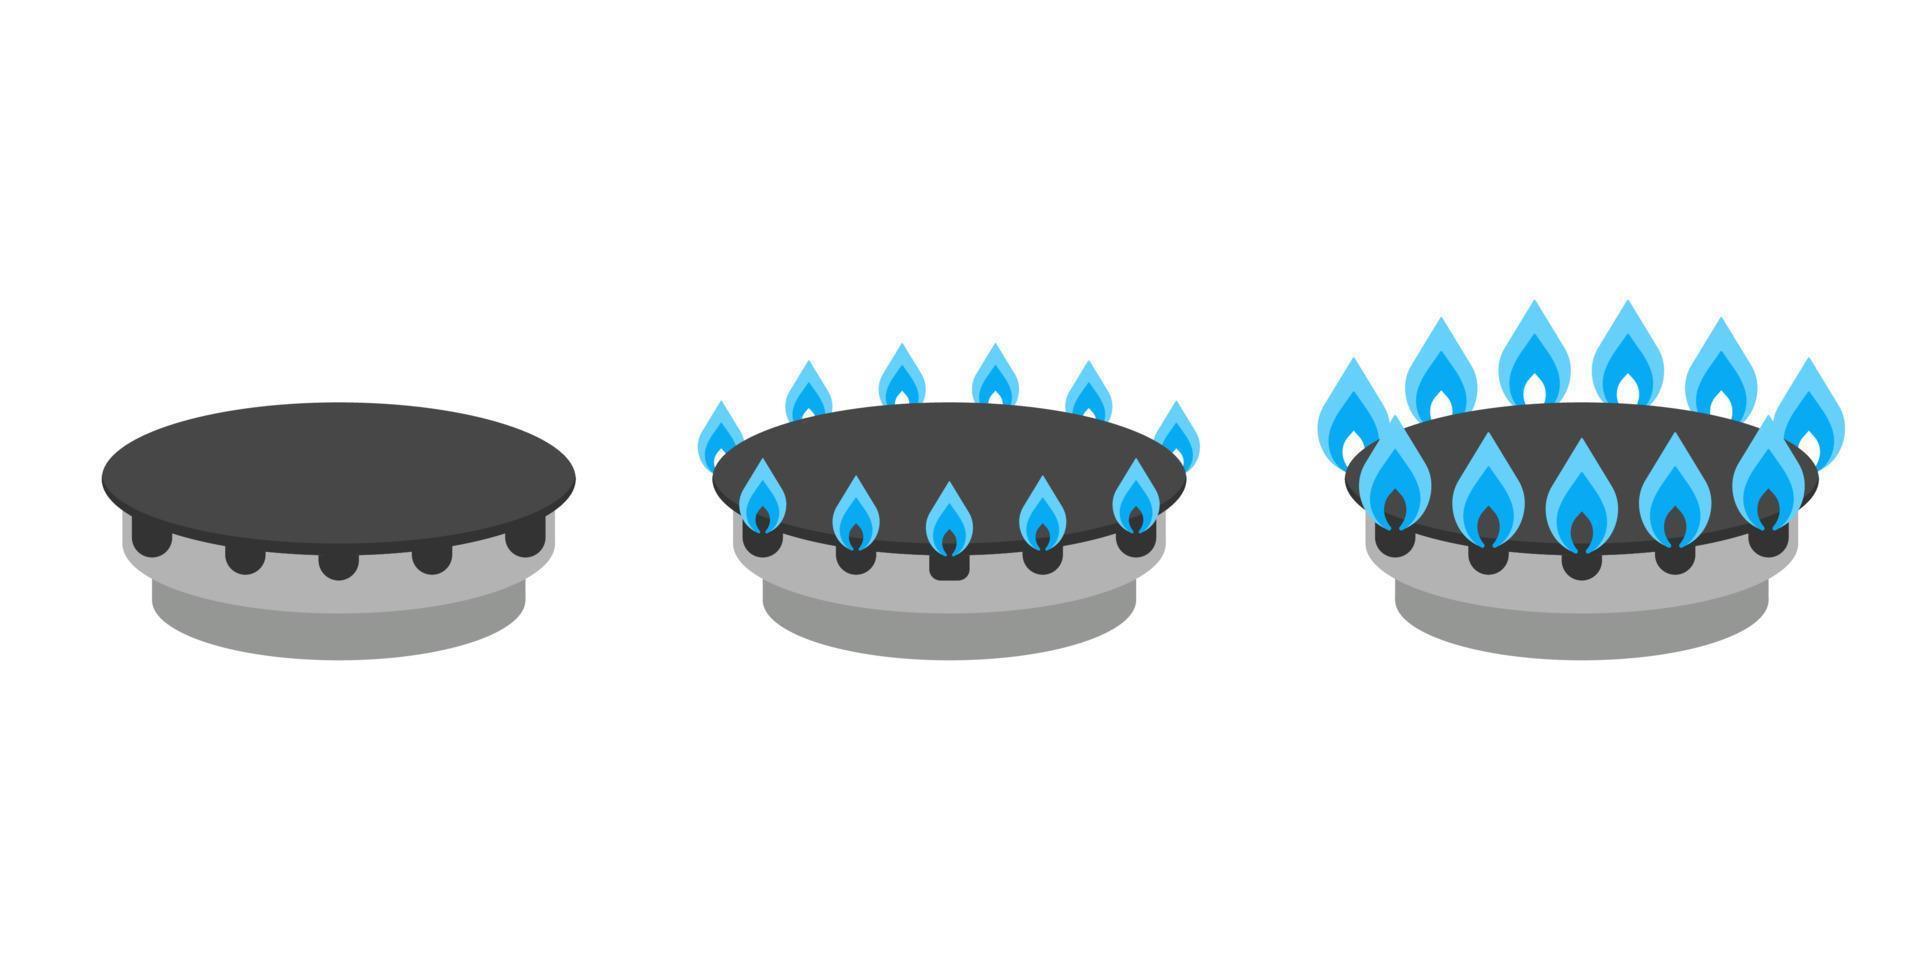 Gas burner with fire set, absence and full blue flame on stove. Saving expensive gas. Hob on gas stove. Home cooking plate in kitchen. Vector flat illustration